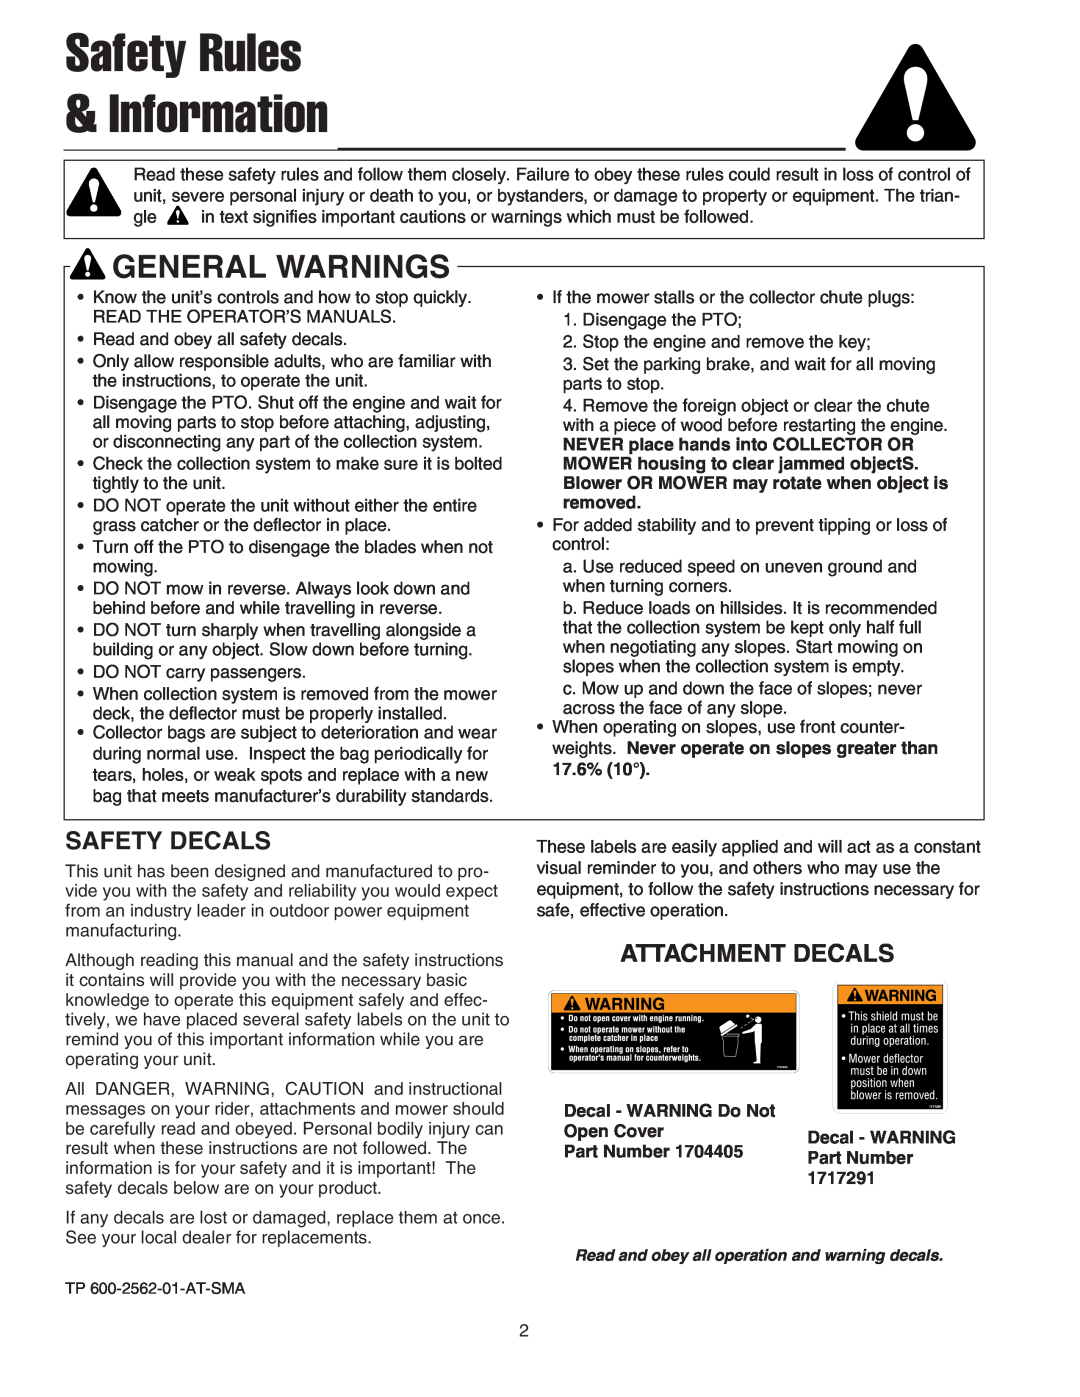 Snapper Clean Sweep Triple Catcher manual Safety Rules Information, Safety Decals, Attachment Decals, General Warnings 